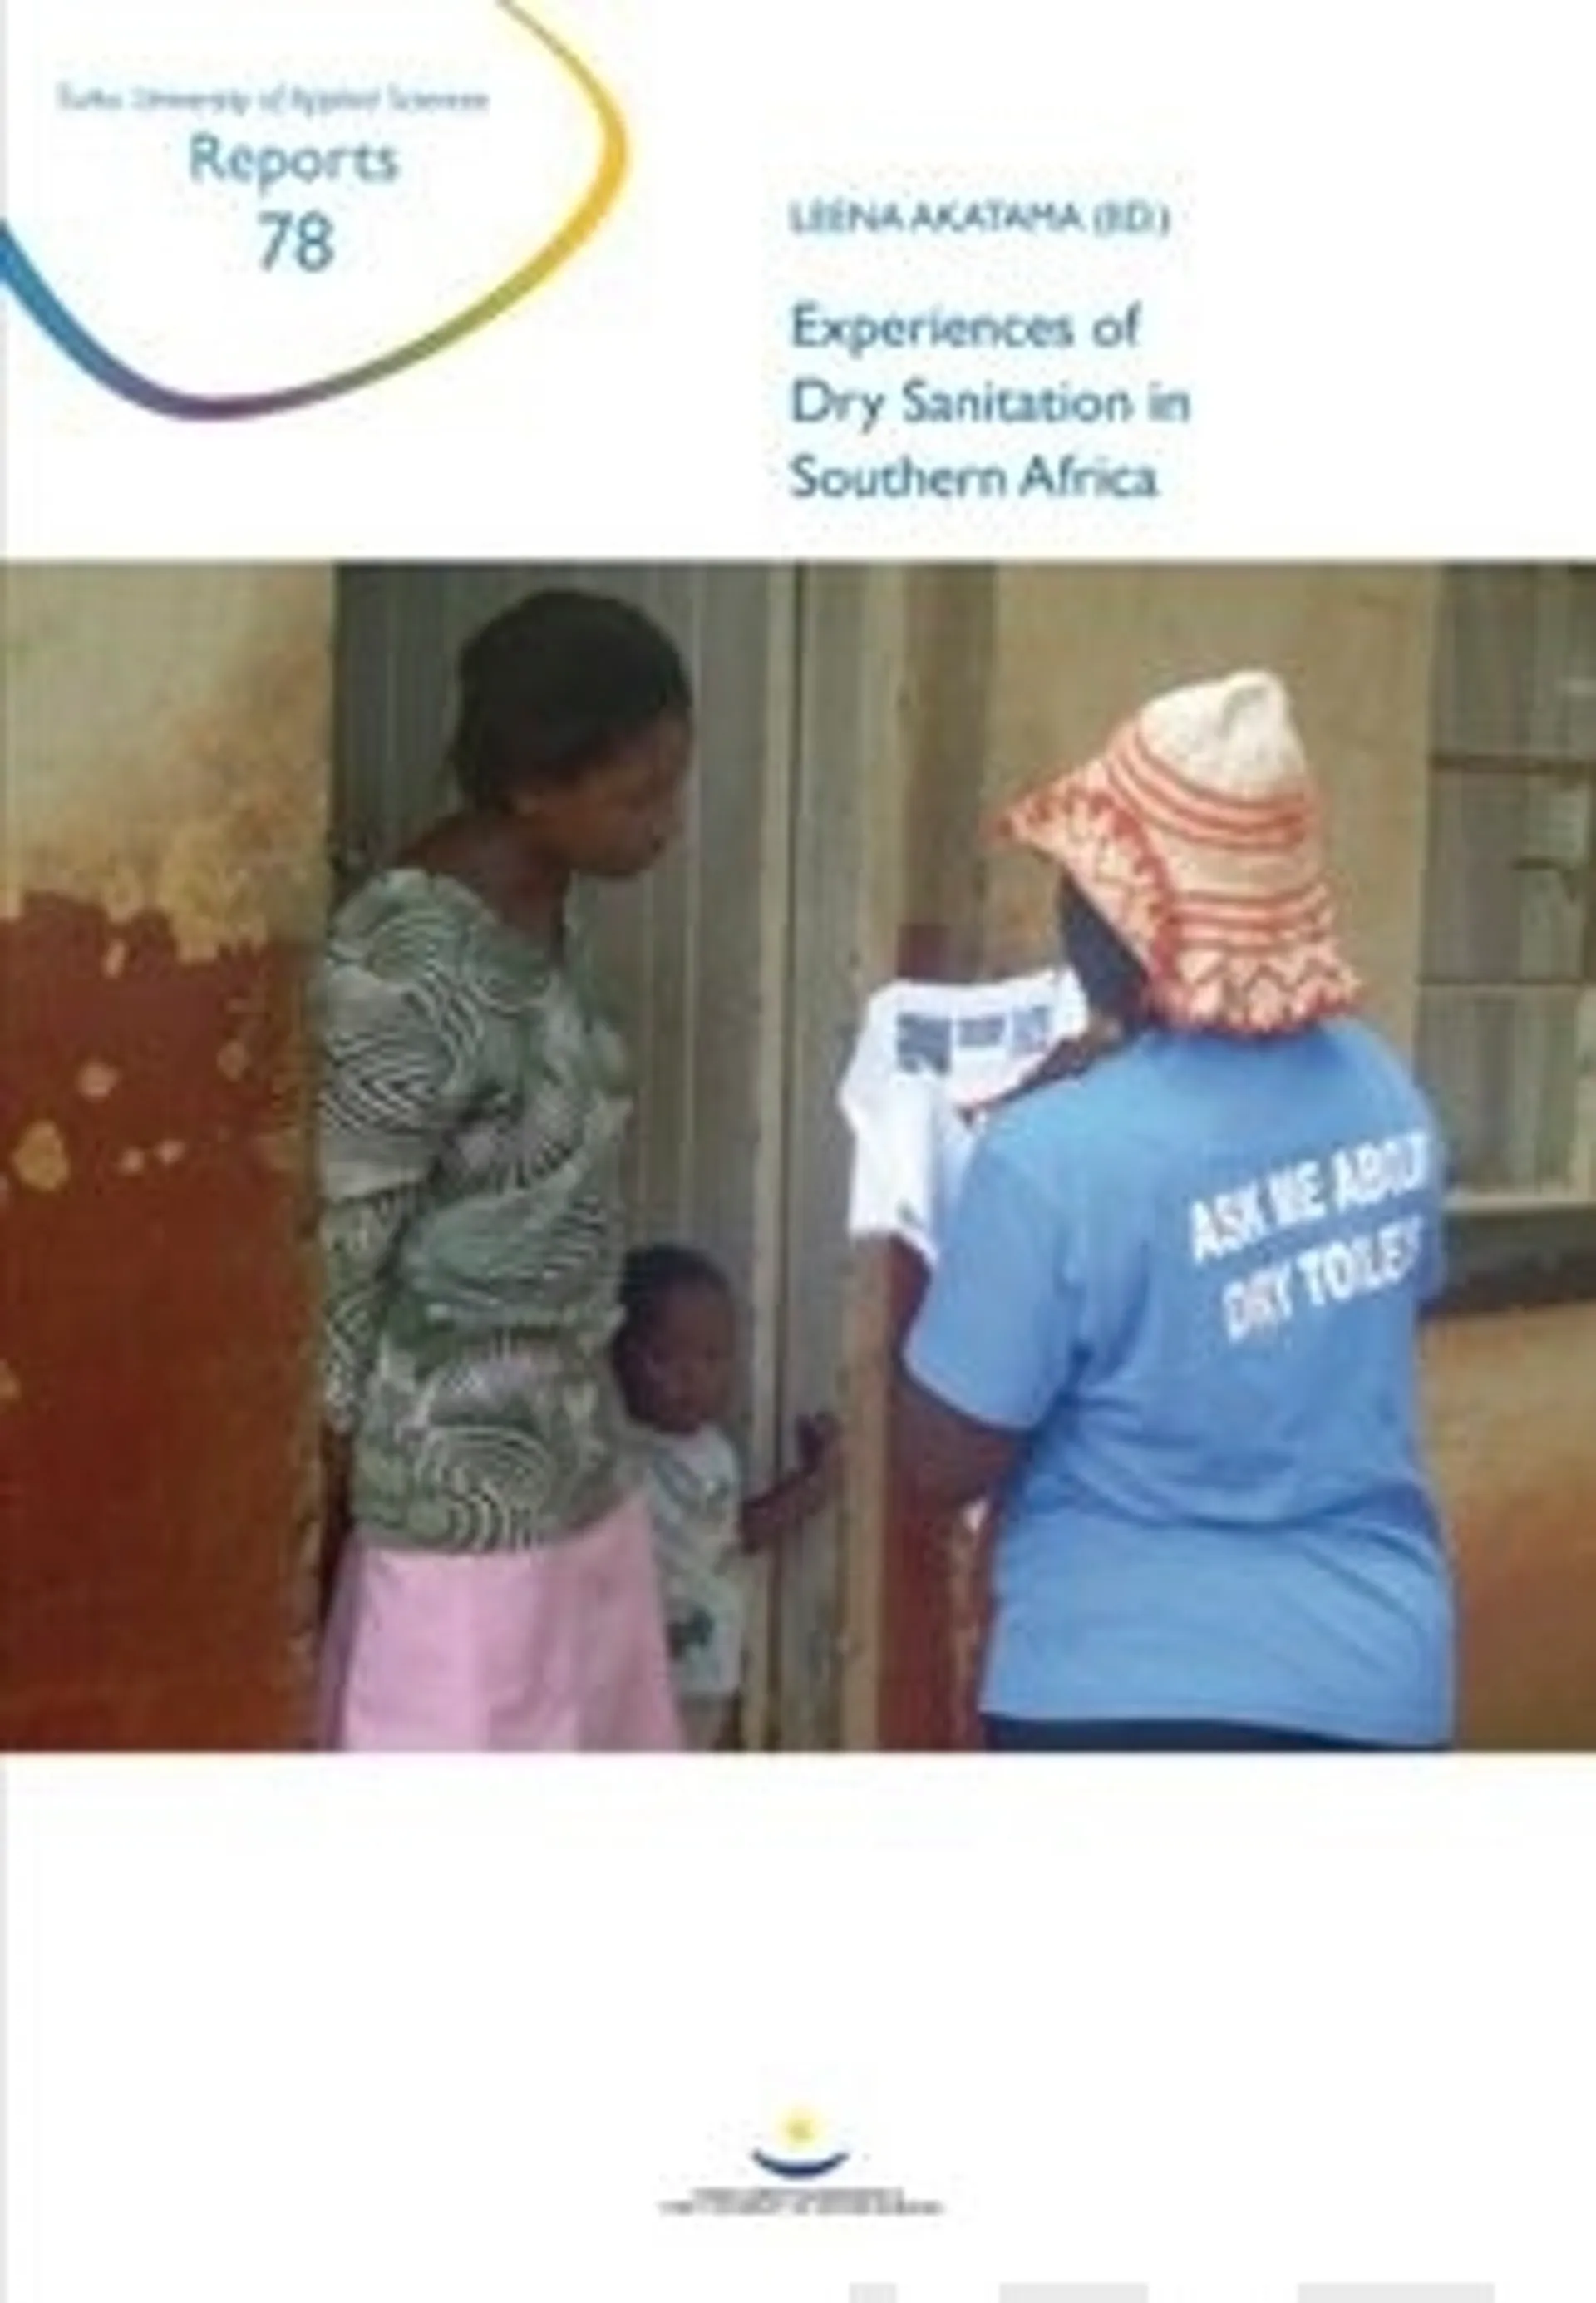 Experiences of dry sanitation in Southern Africa